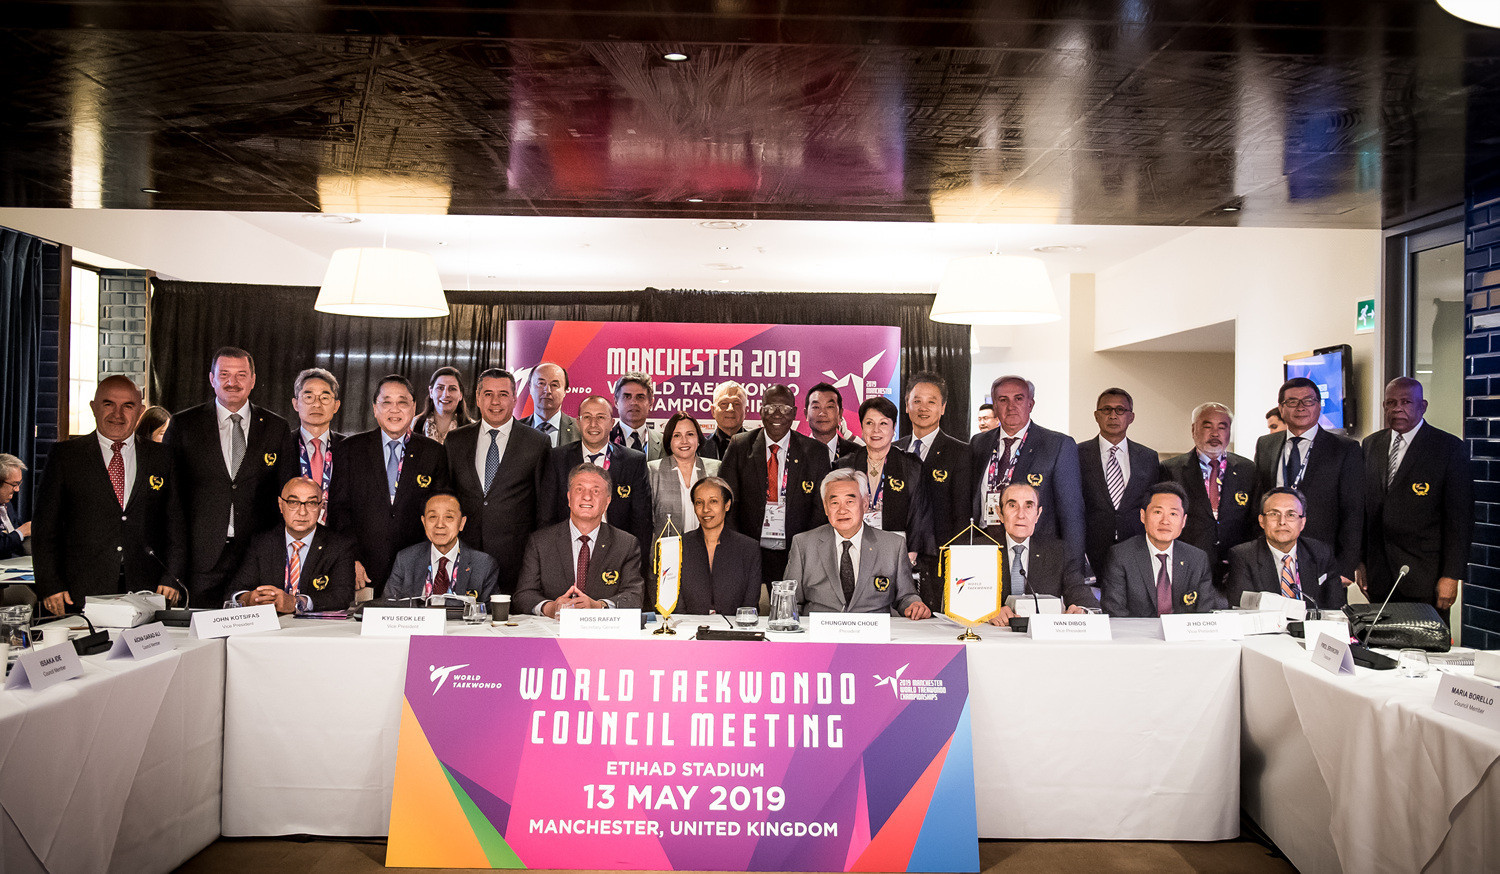 The World Taekwondo Council meeting was held in Manchester in the build-up to the 2019 World Championships ©World Taekwondo